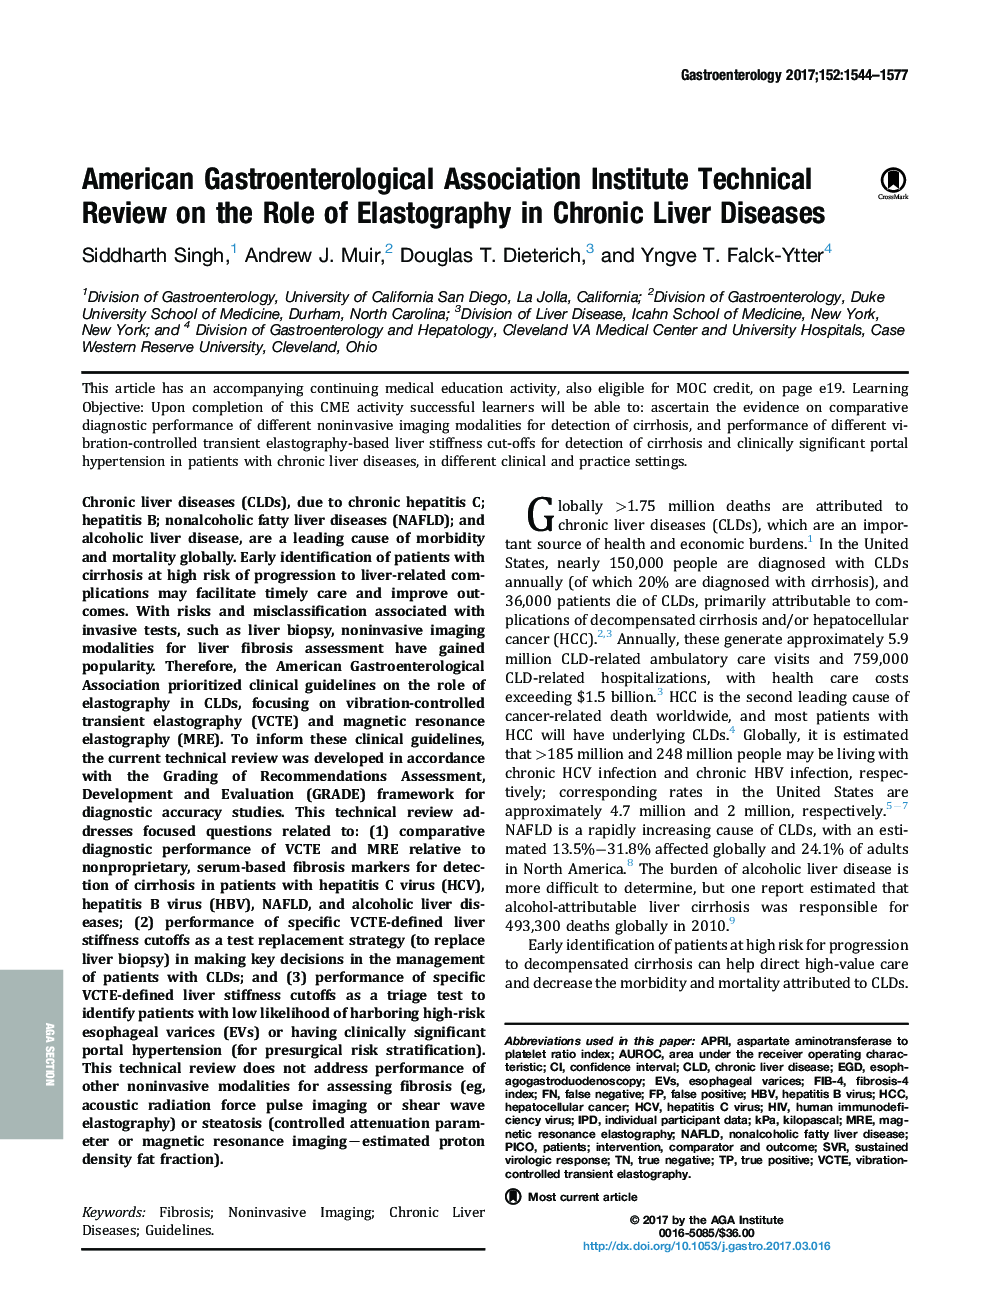 American Gastroenterological Association Institute Technical Review on the Role of Elastography in Chronic Liver Diseases